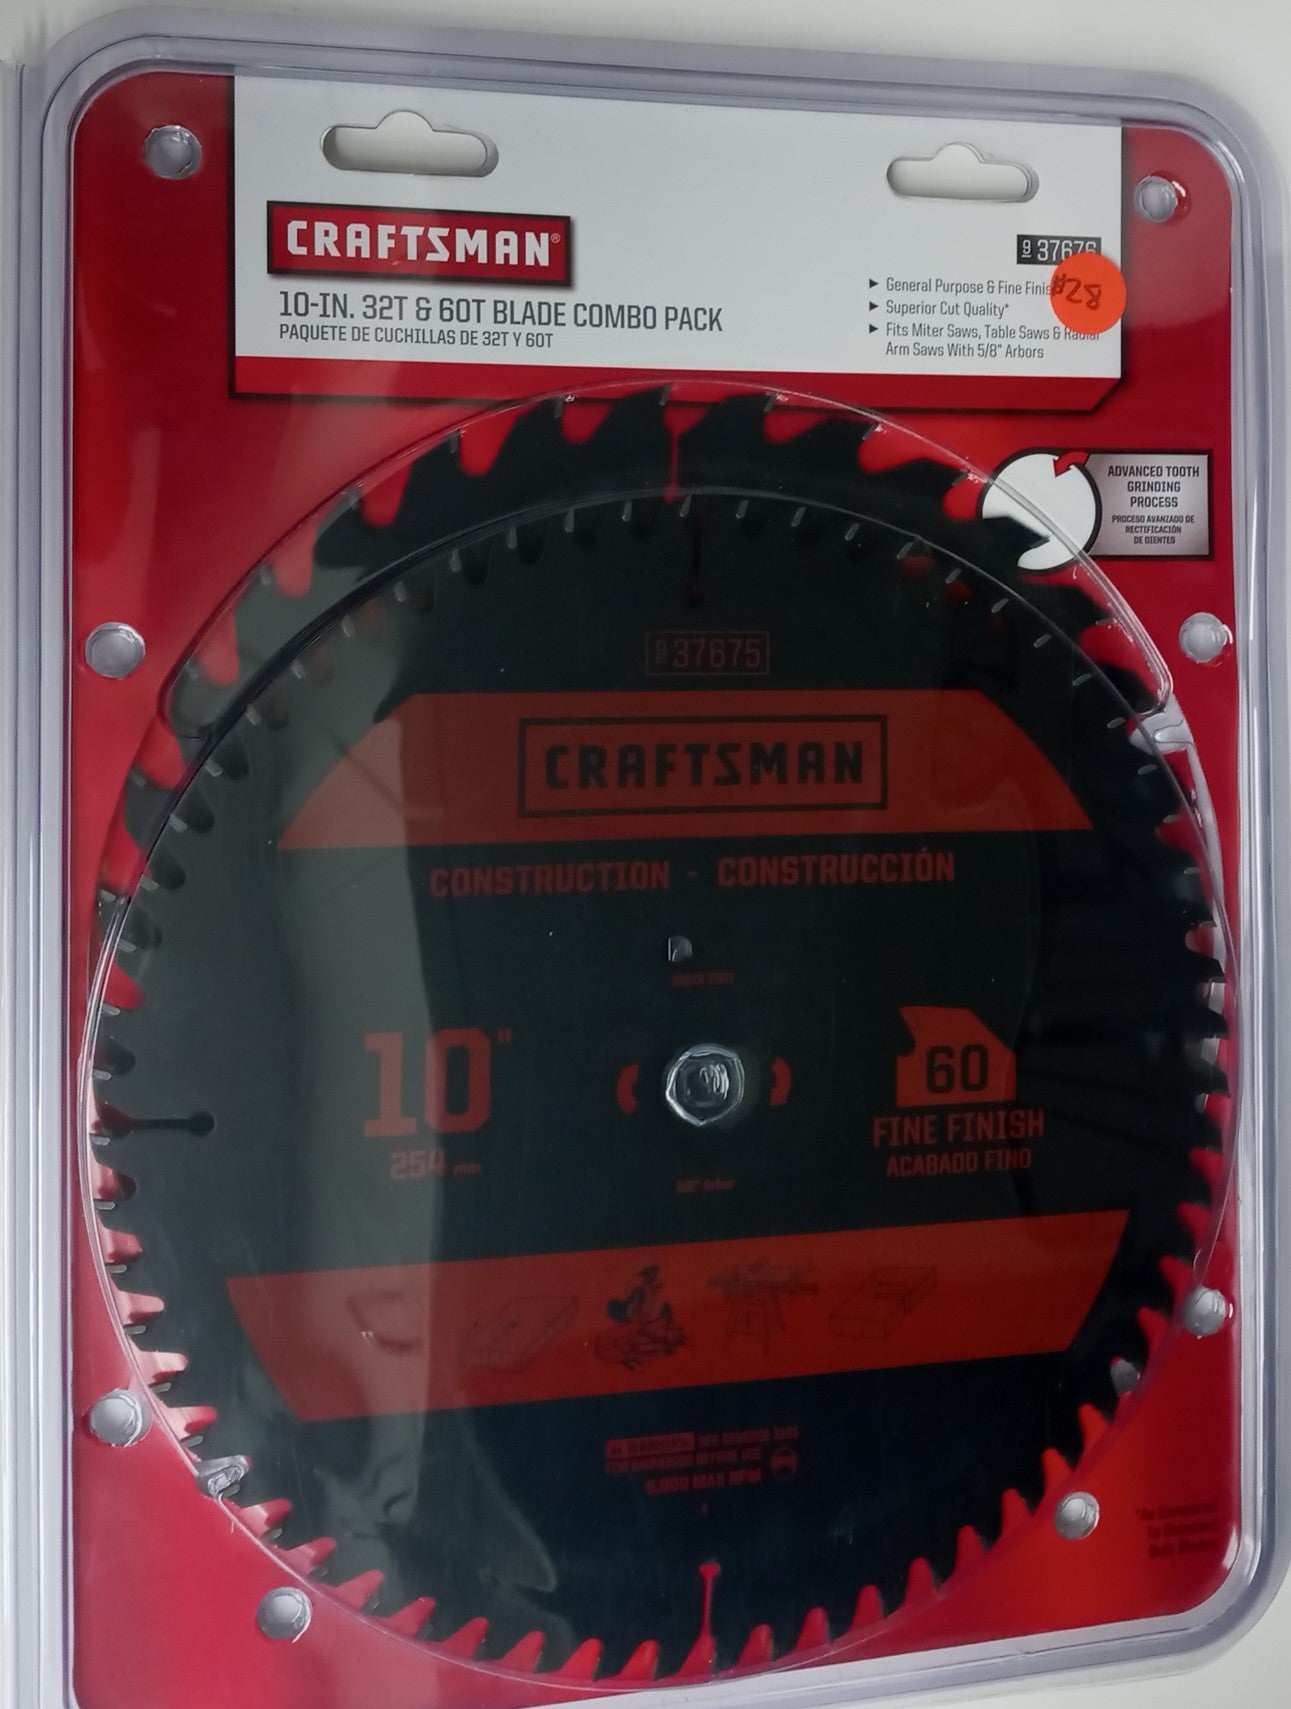 Craftsman 37676 10" x 32 Tooth & 60 Tooth Carbide Saw Blades